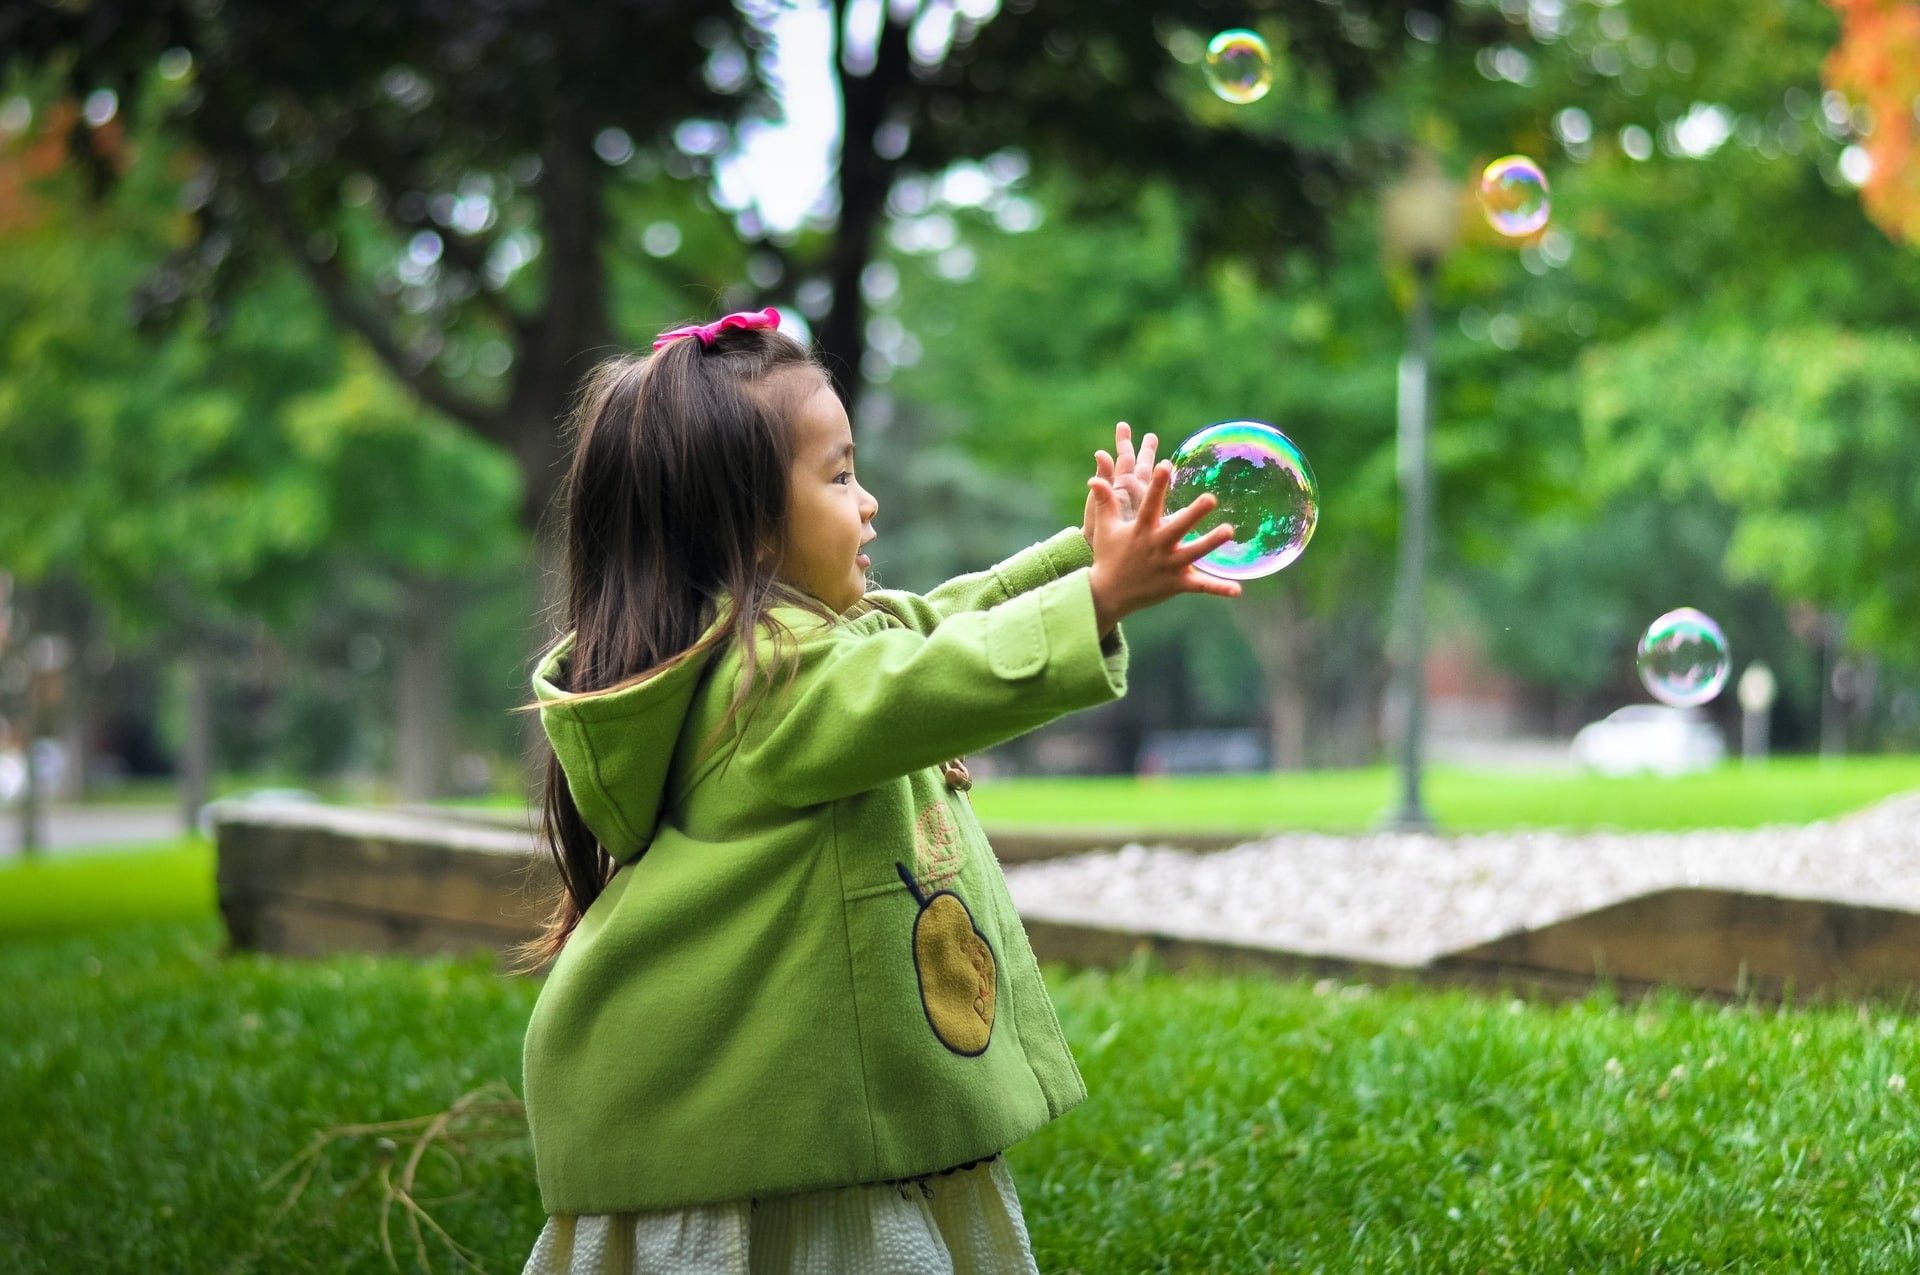 A young girl plays outside with bubbles to promote physical development through play-based learning activities.